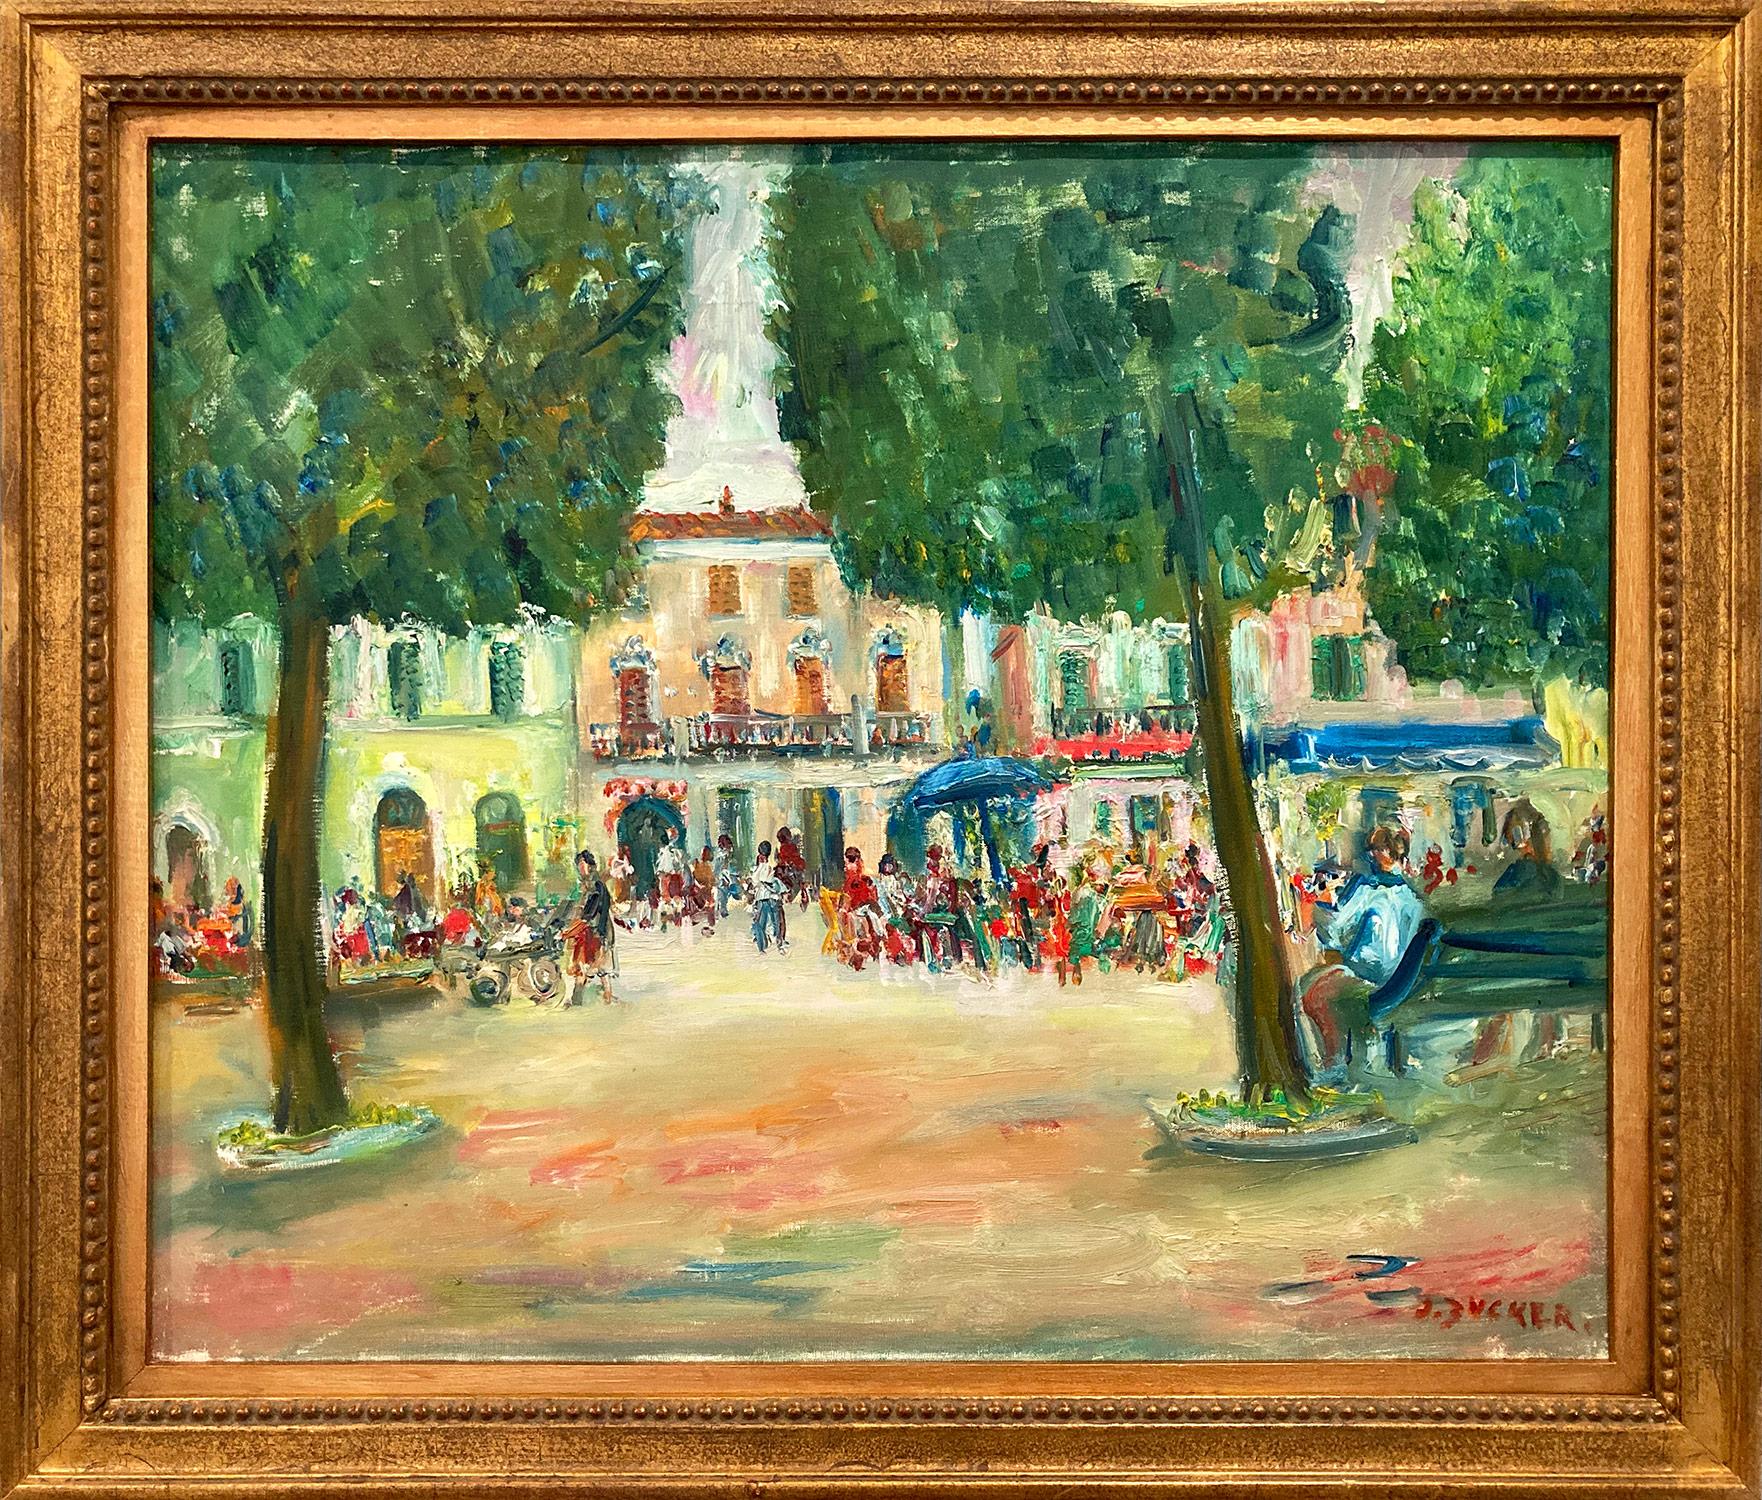 Jacques Zucker Landscape Painting - "Downtown Plaza" Post-Impressionism Landscape Oil Painting with Figures in Plaza